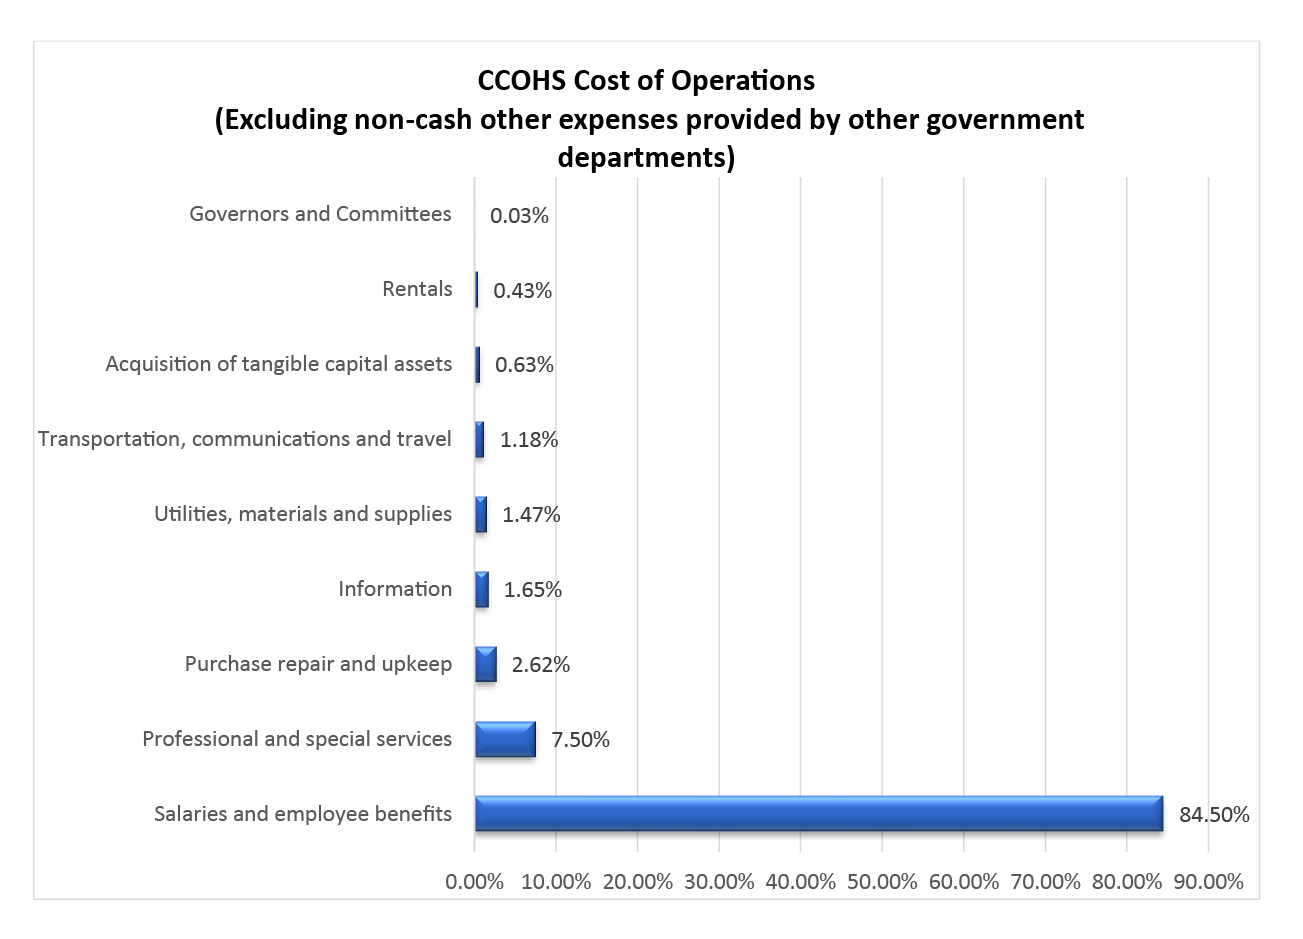 Graph for CCOHS Cost of Operations
				  (Excluding non-cash other expenses provided by other government departments)